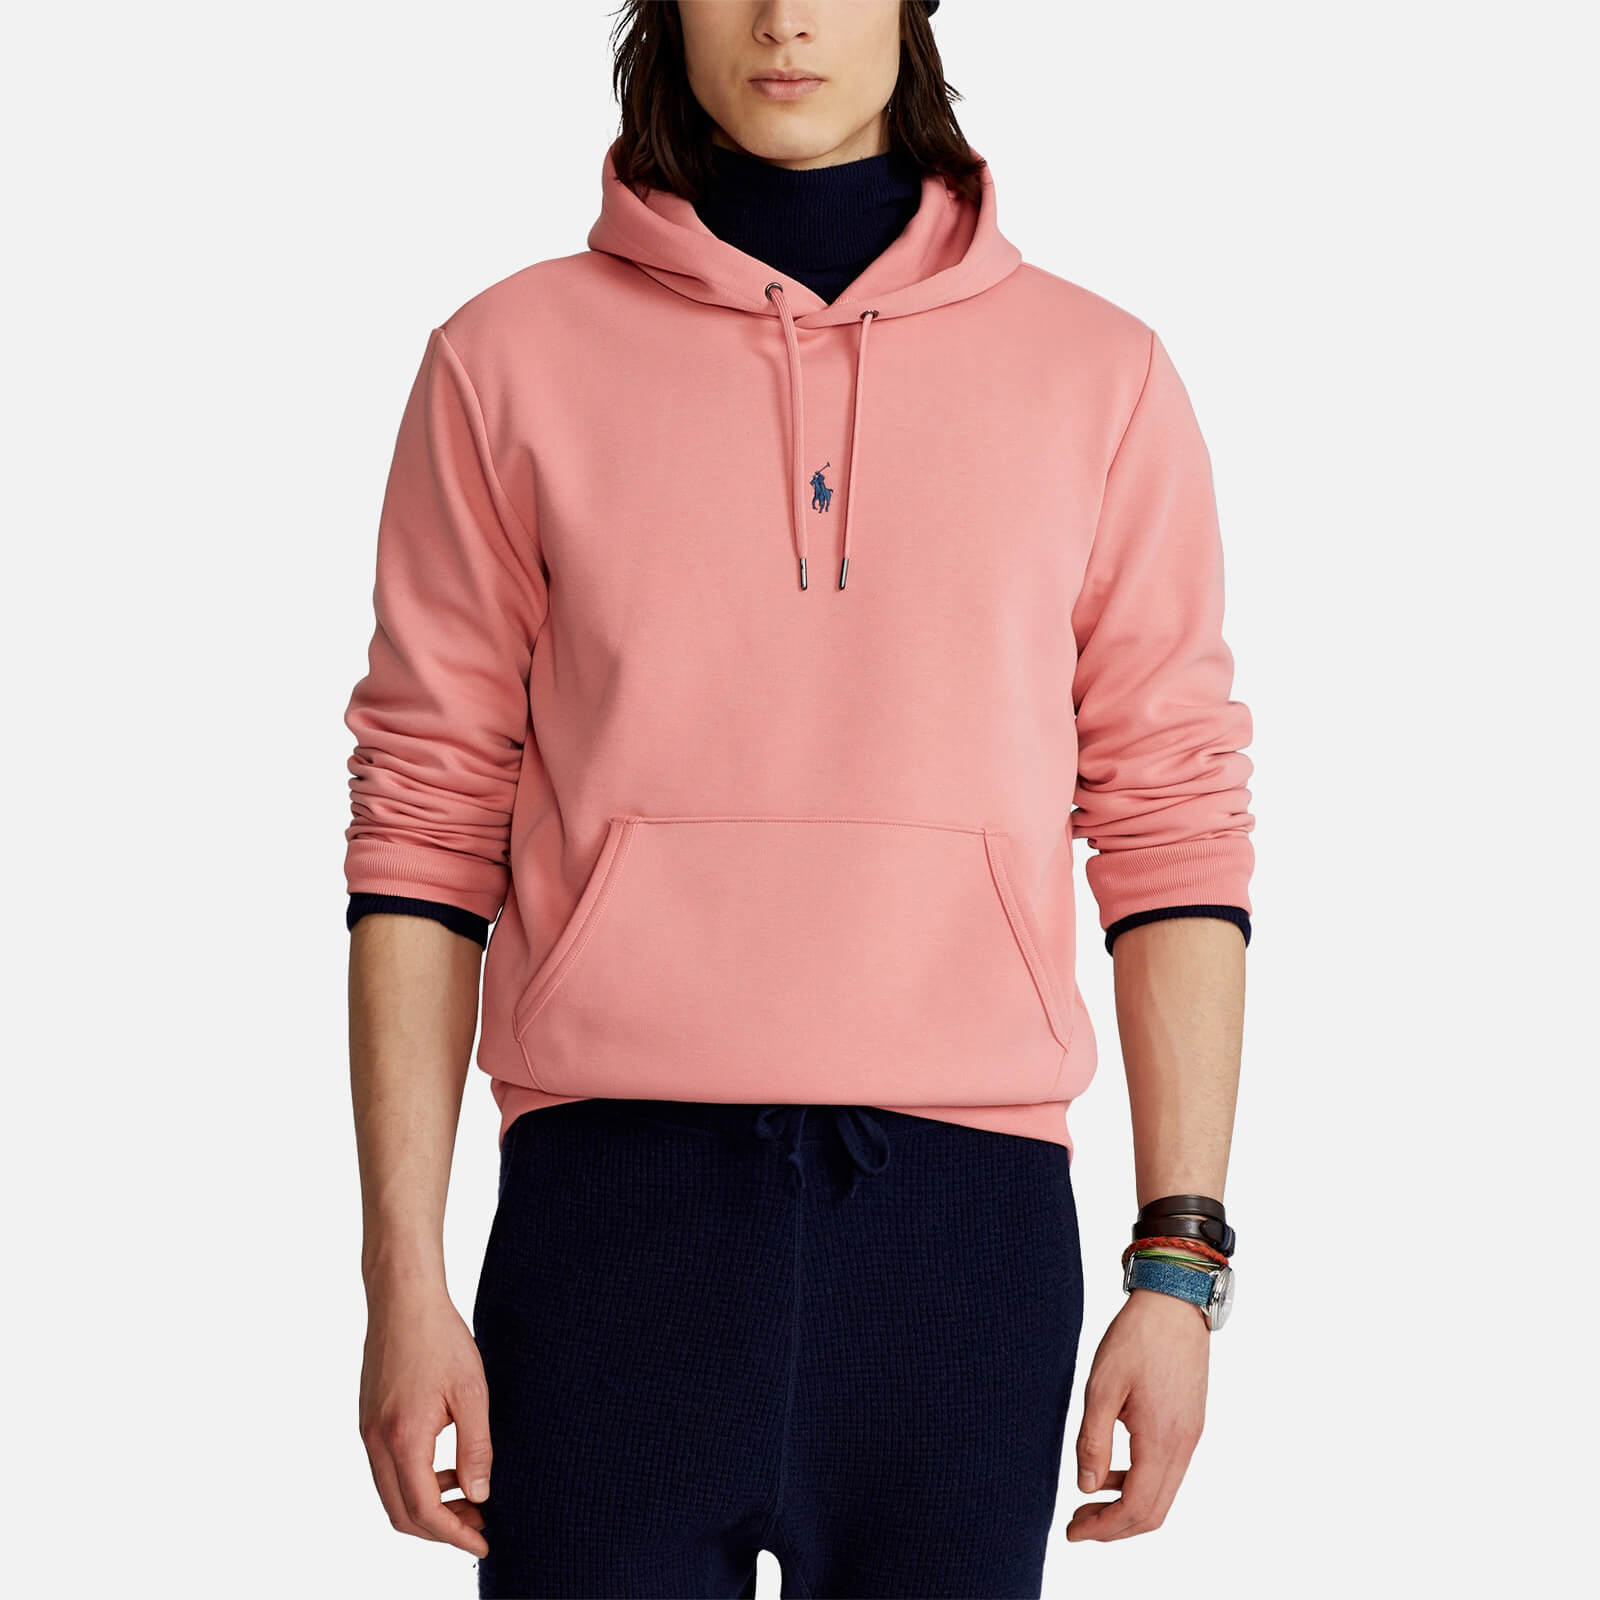 polo ralph lauren men's double knitted centre polo player hoodie - dusty rose - s